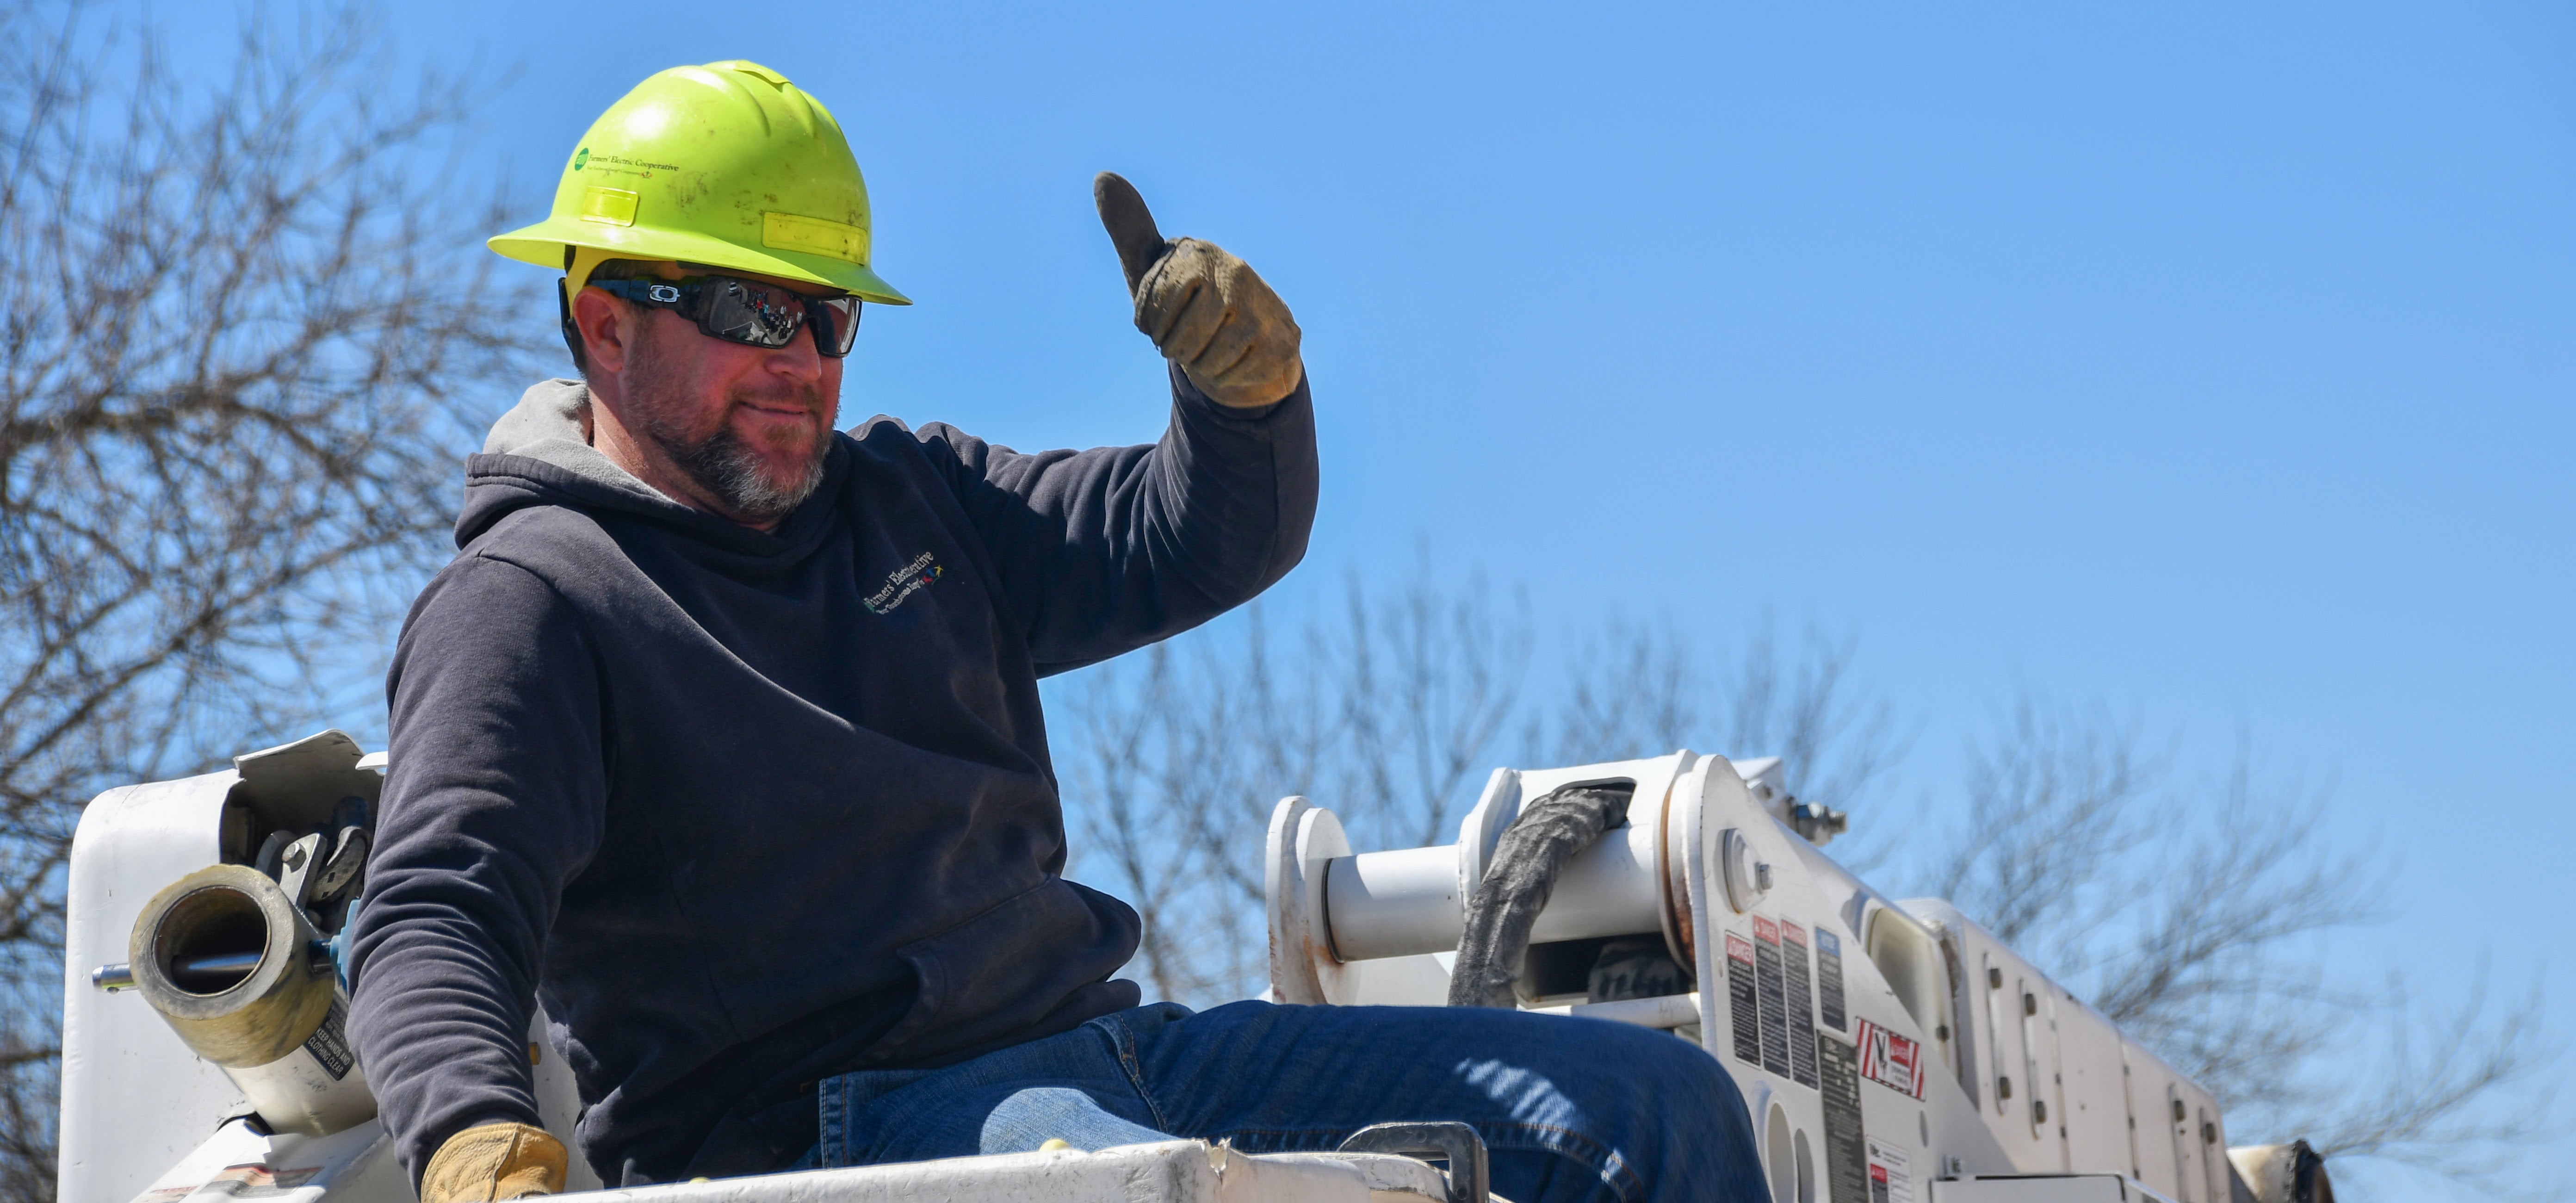 Lineman gives thumbs up from the bucket truck